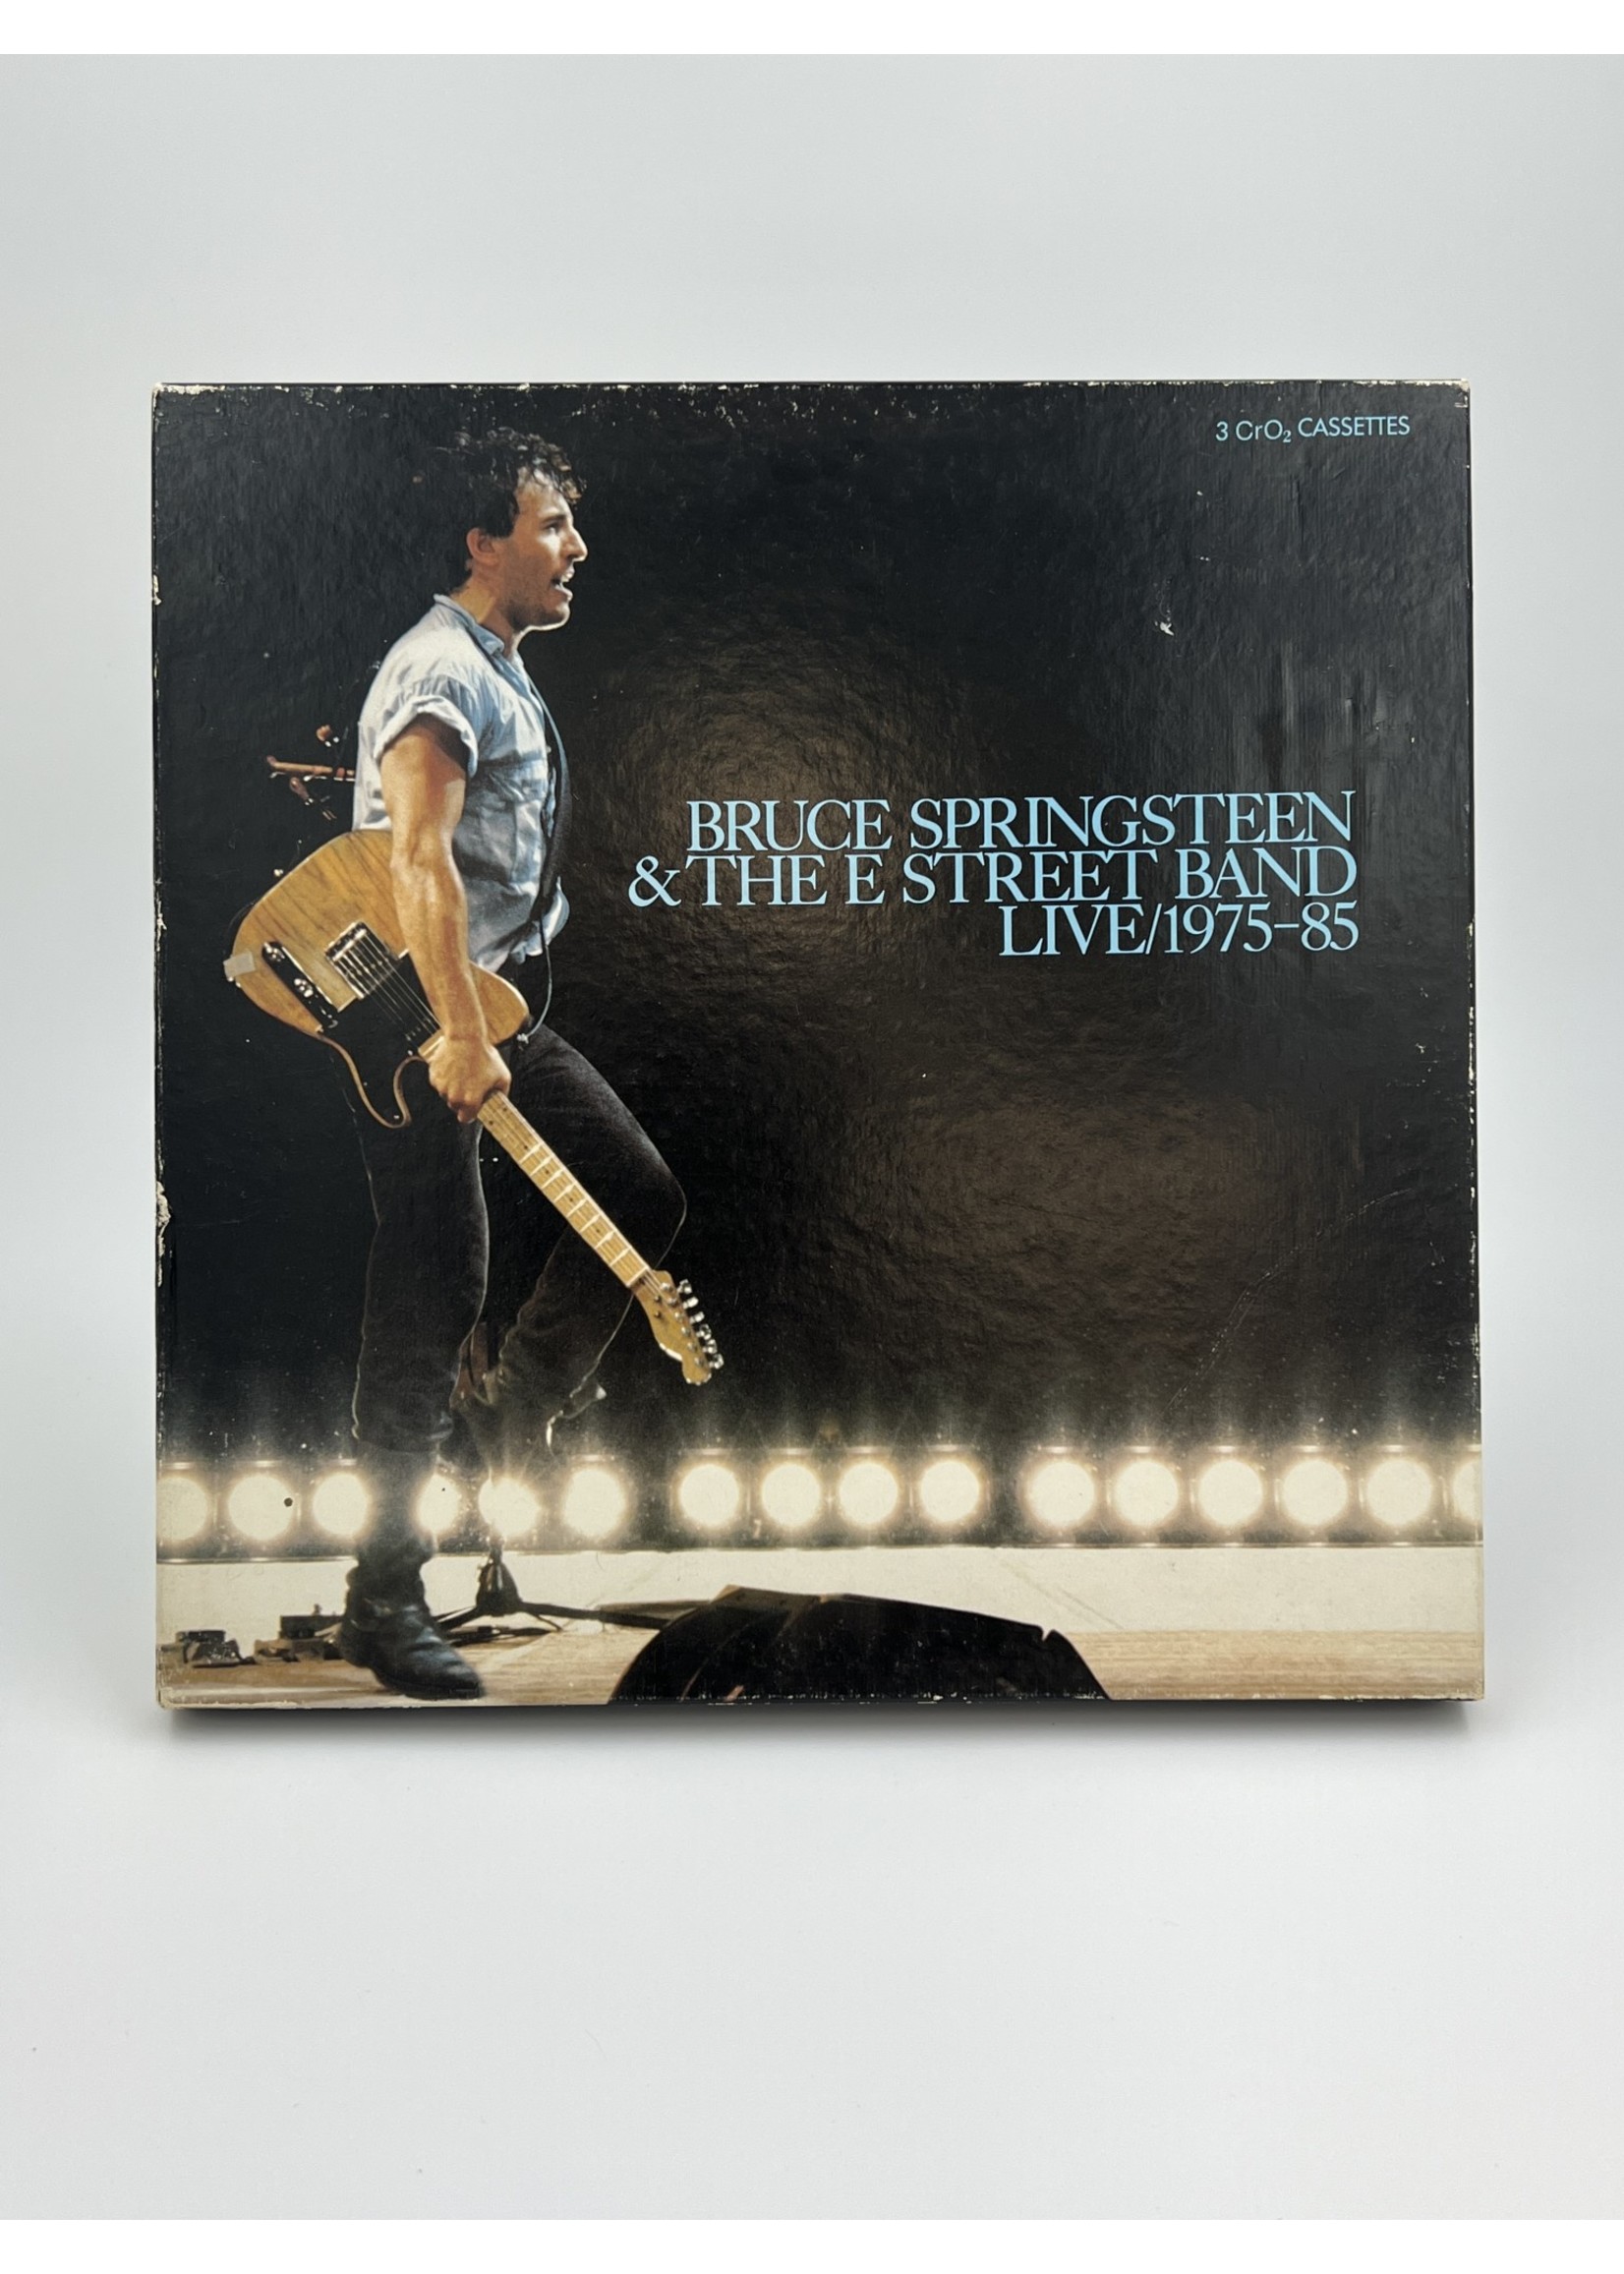 LP Bruce Springsteen and The E Street Band Live 1975 1985 3 Cassette Box Set